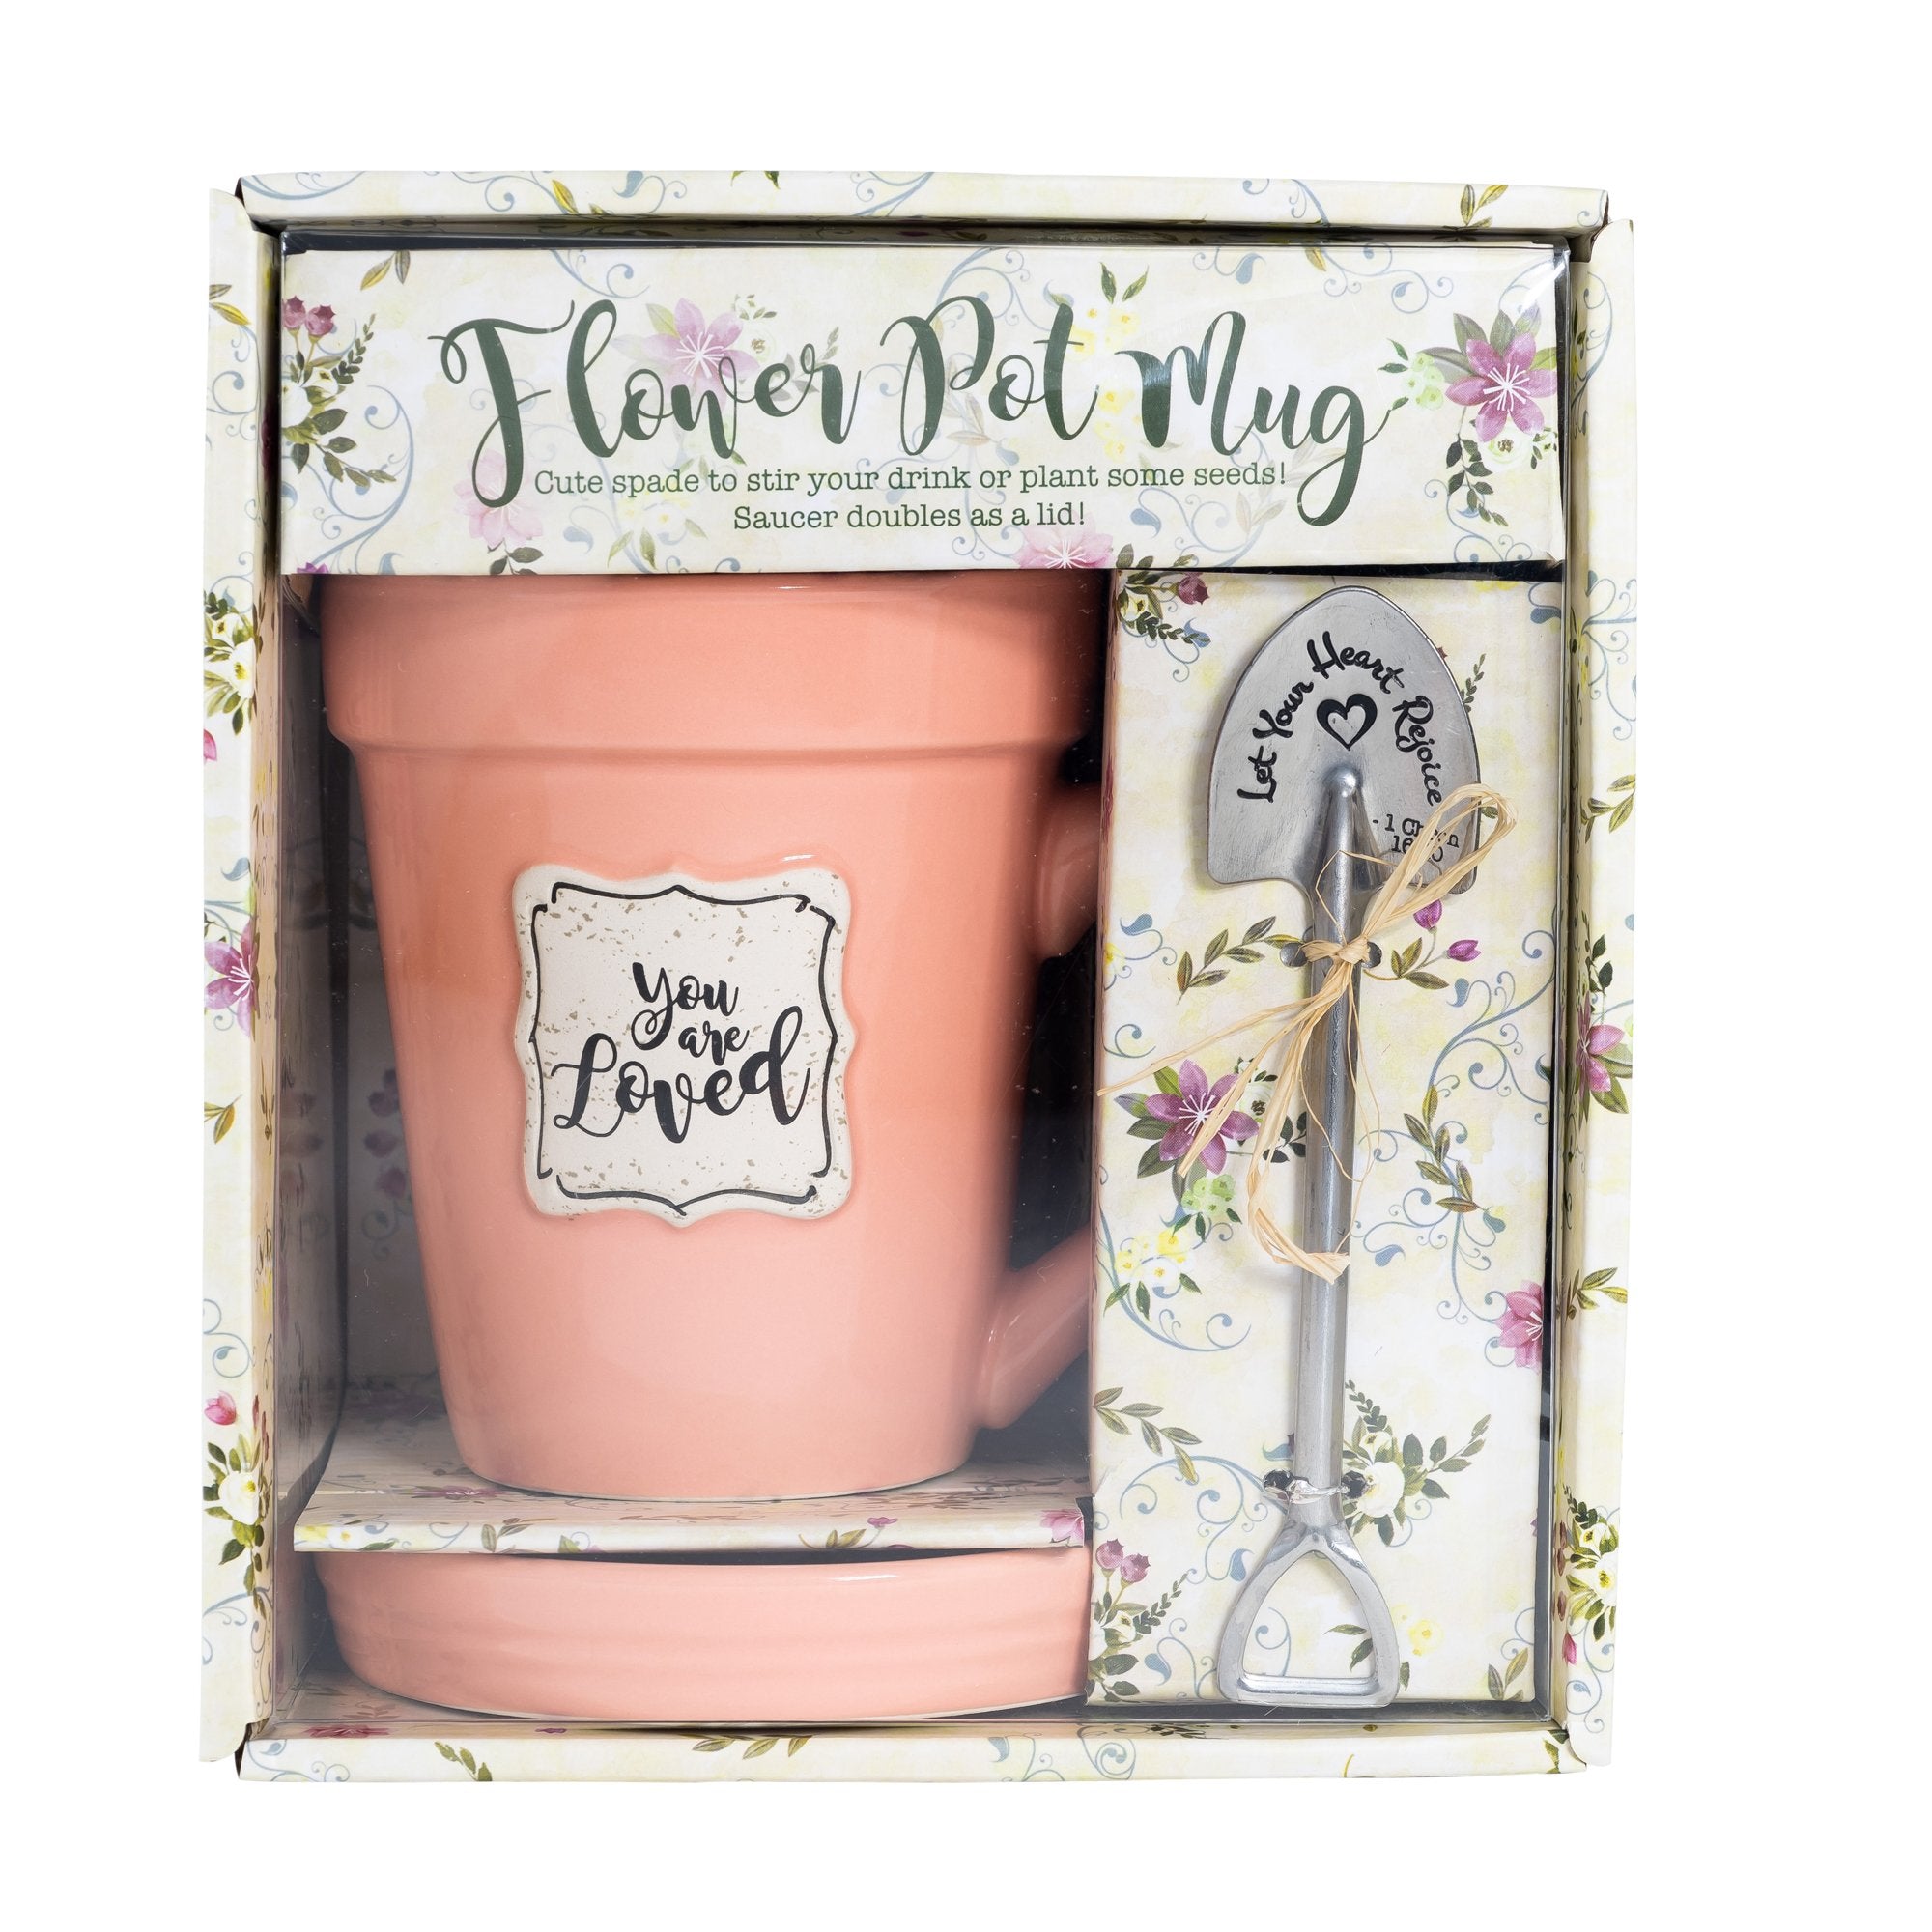 Peach Flower Pot Mug w/Scripture - "You are Loved"